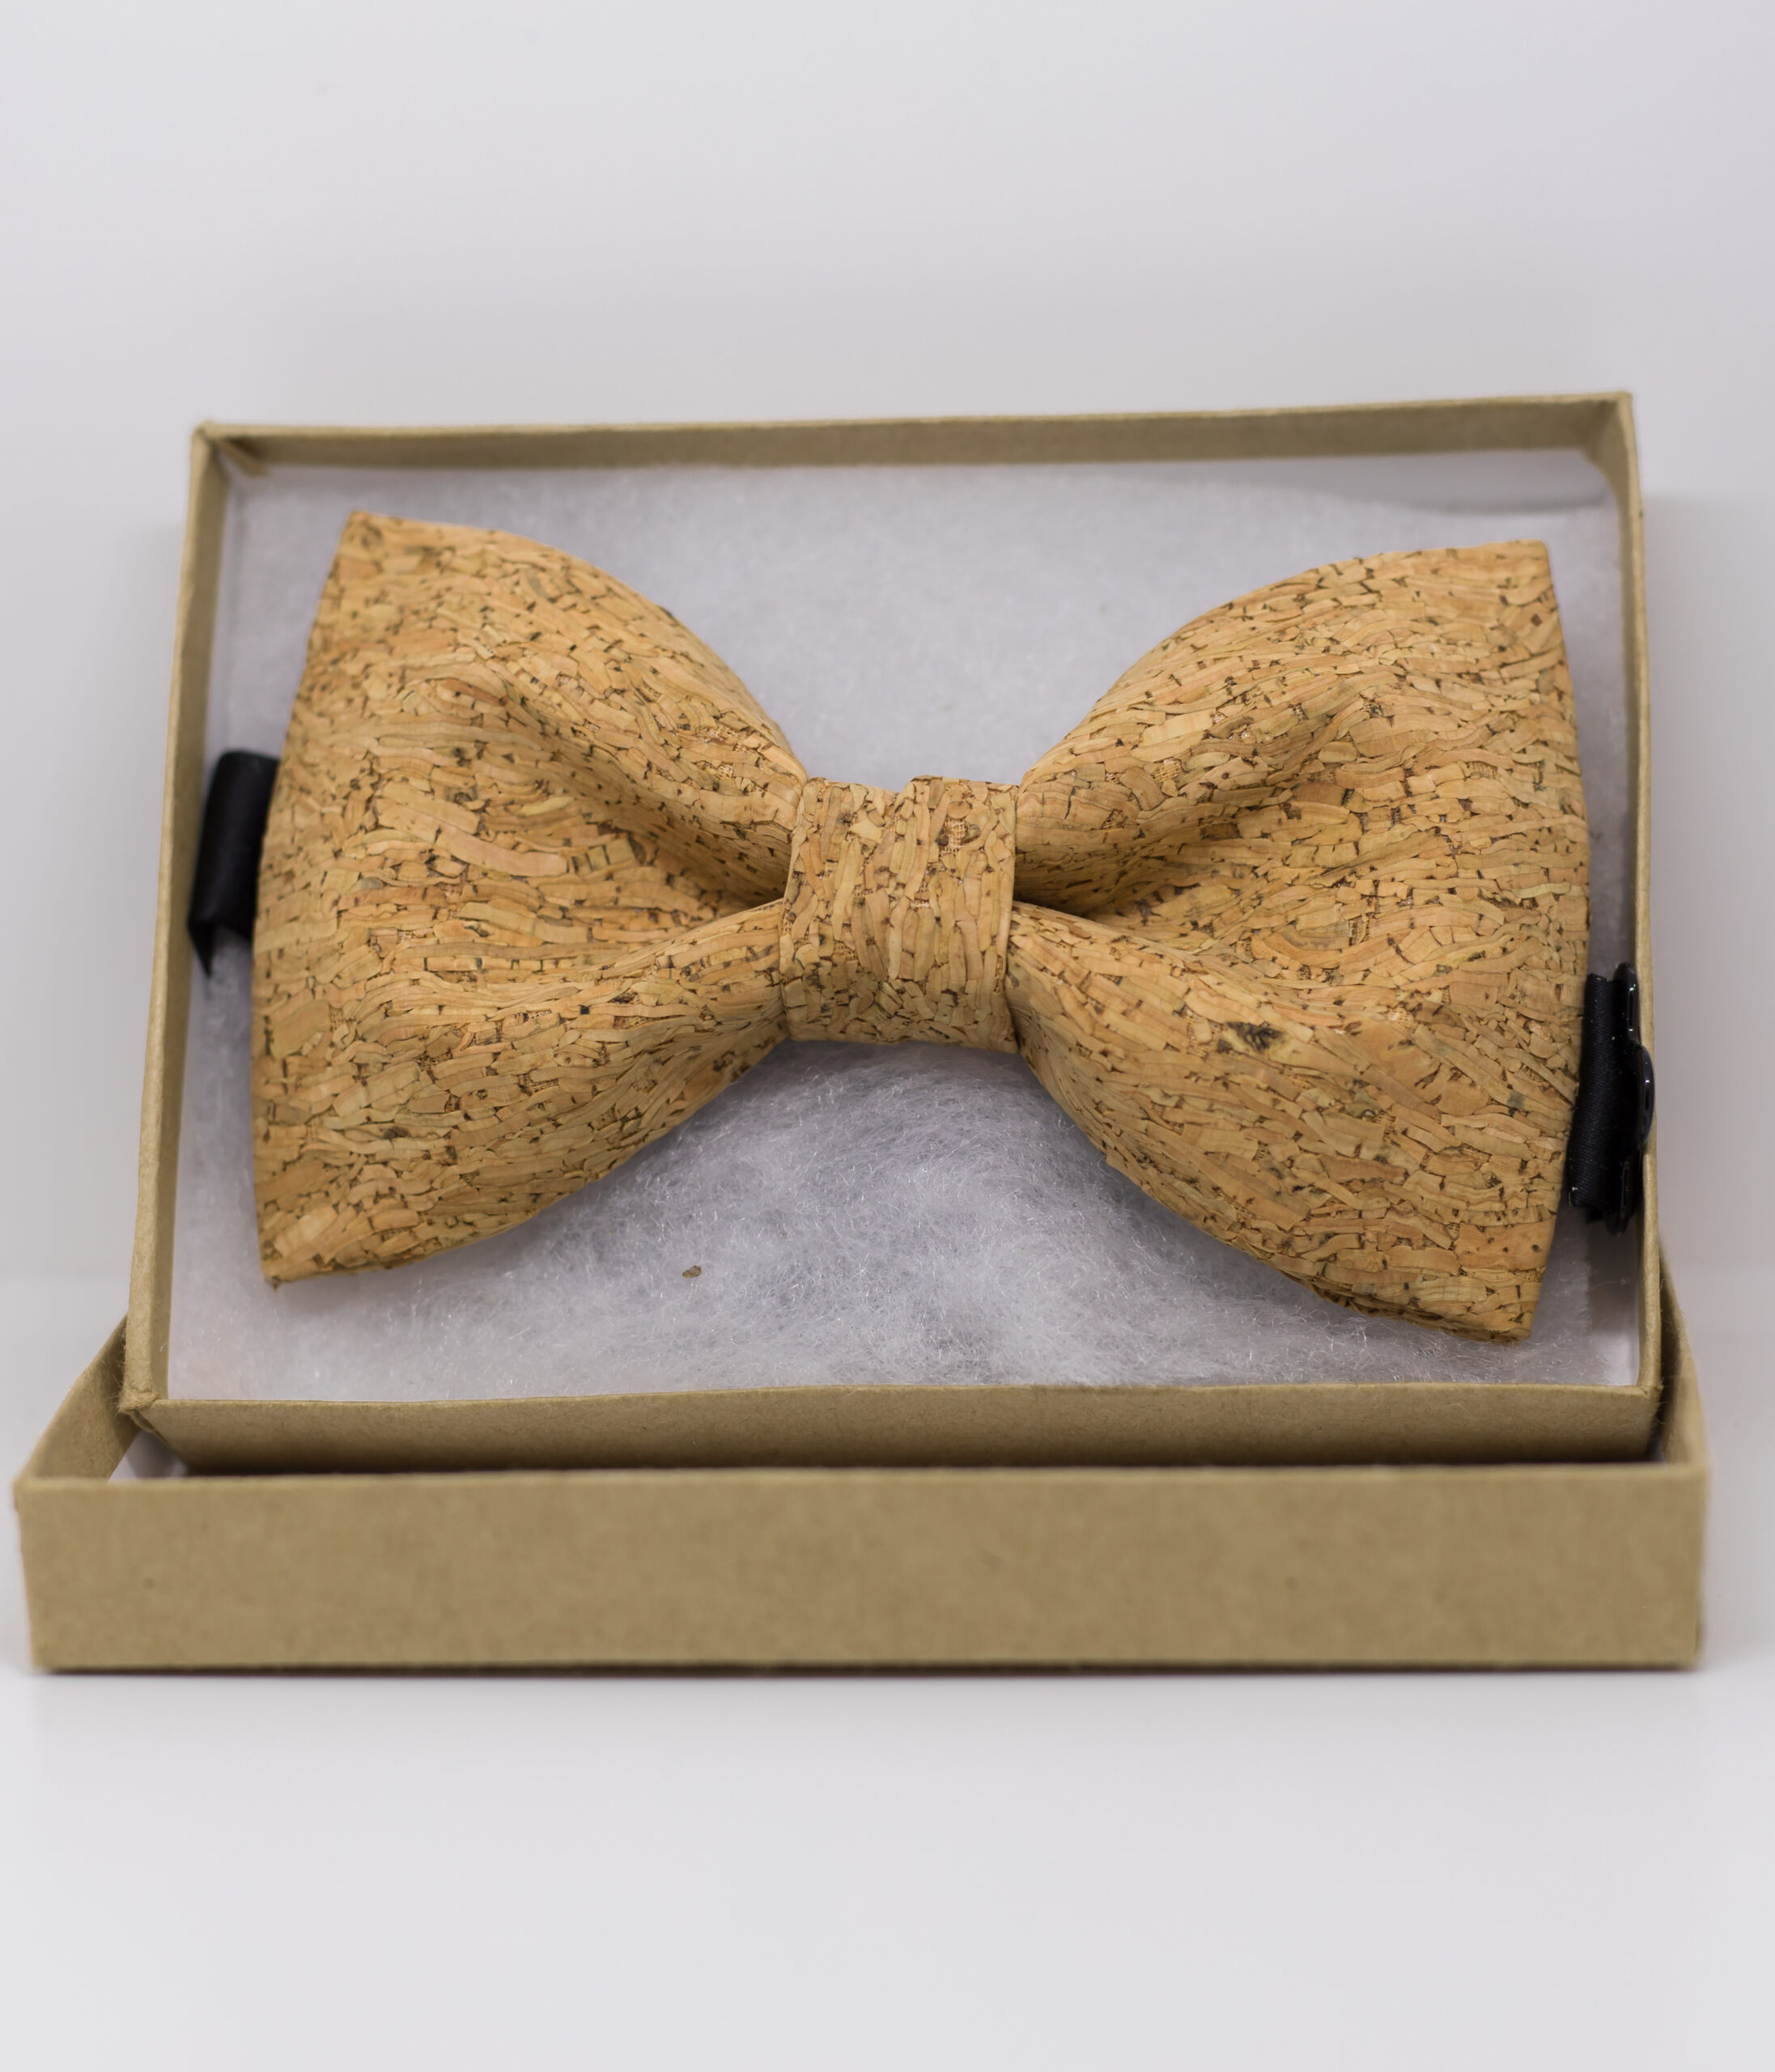 Cork Bow Tie for Adult Le Neuf - Blue/Grey Patterns - Immediate shipment